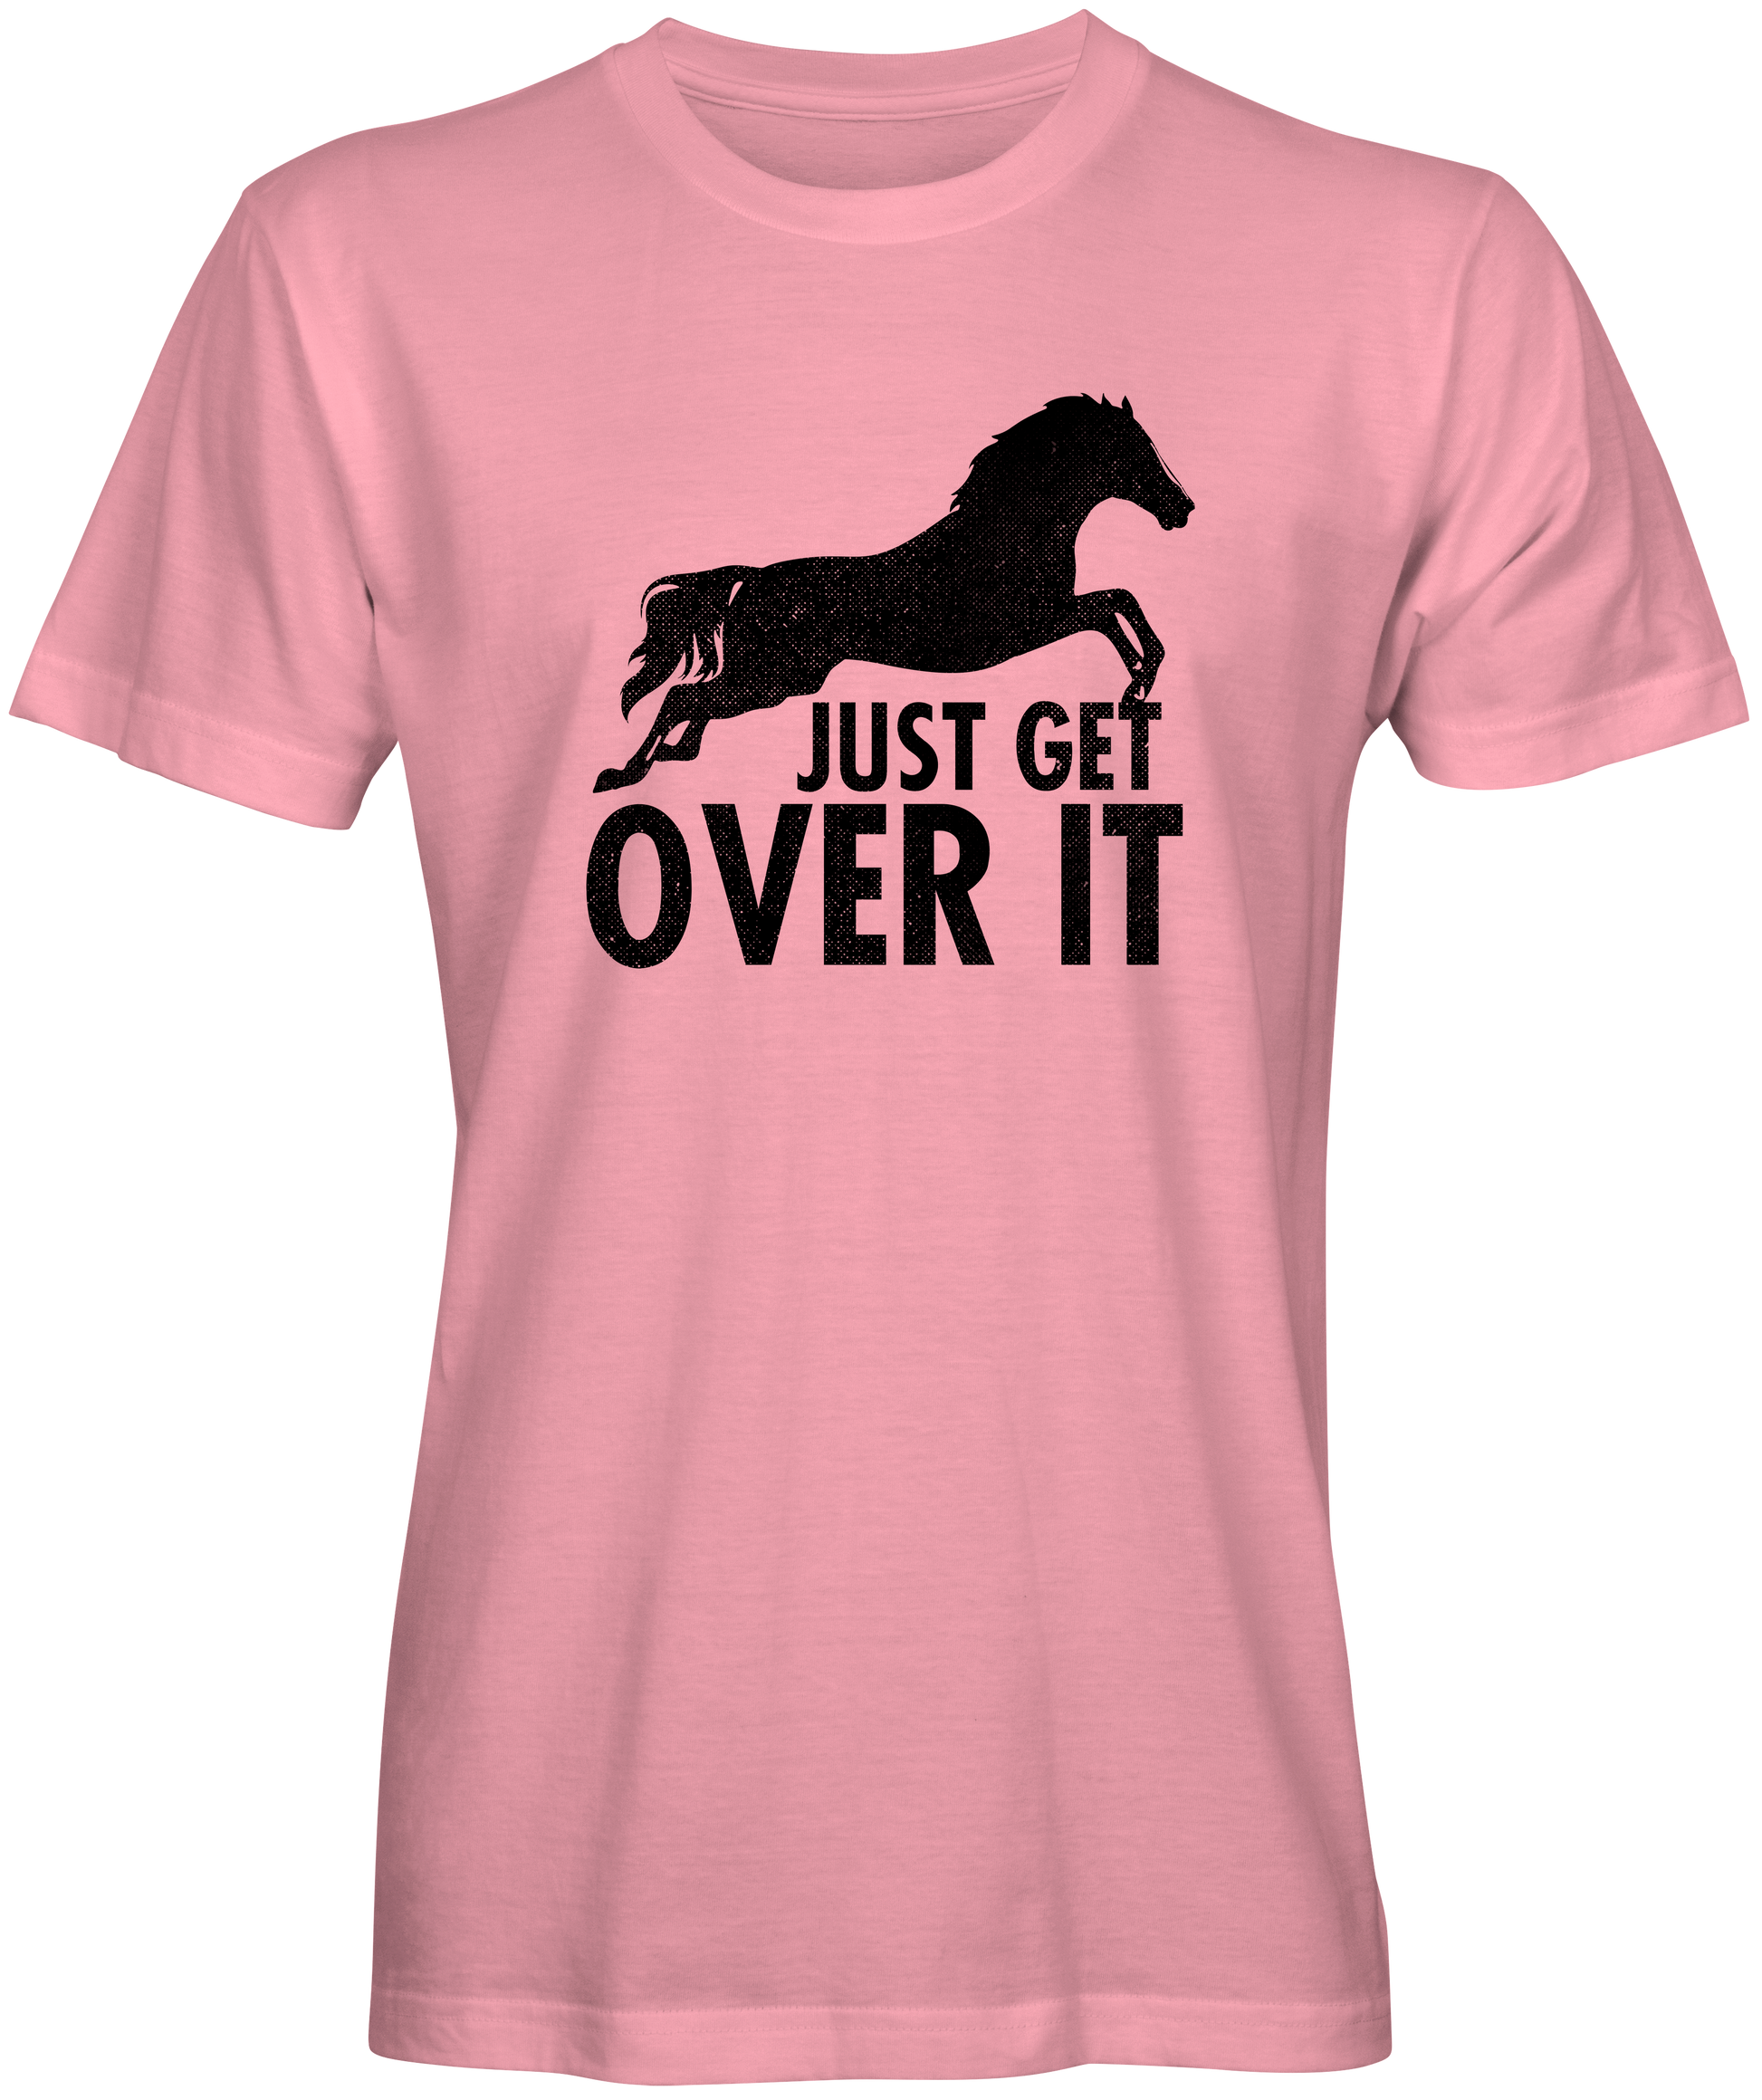 Just Get Over It Motivational T-shirts